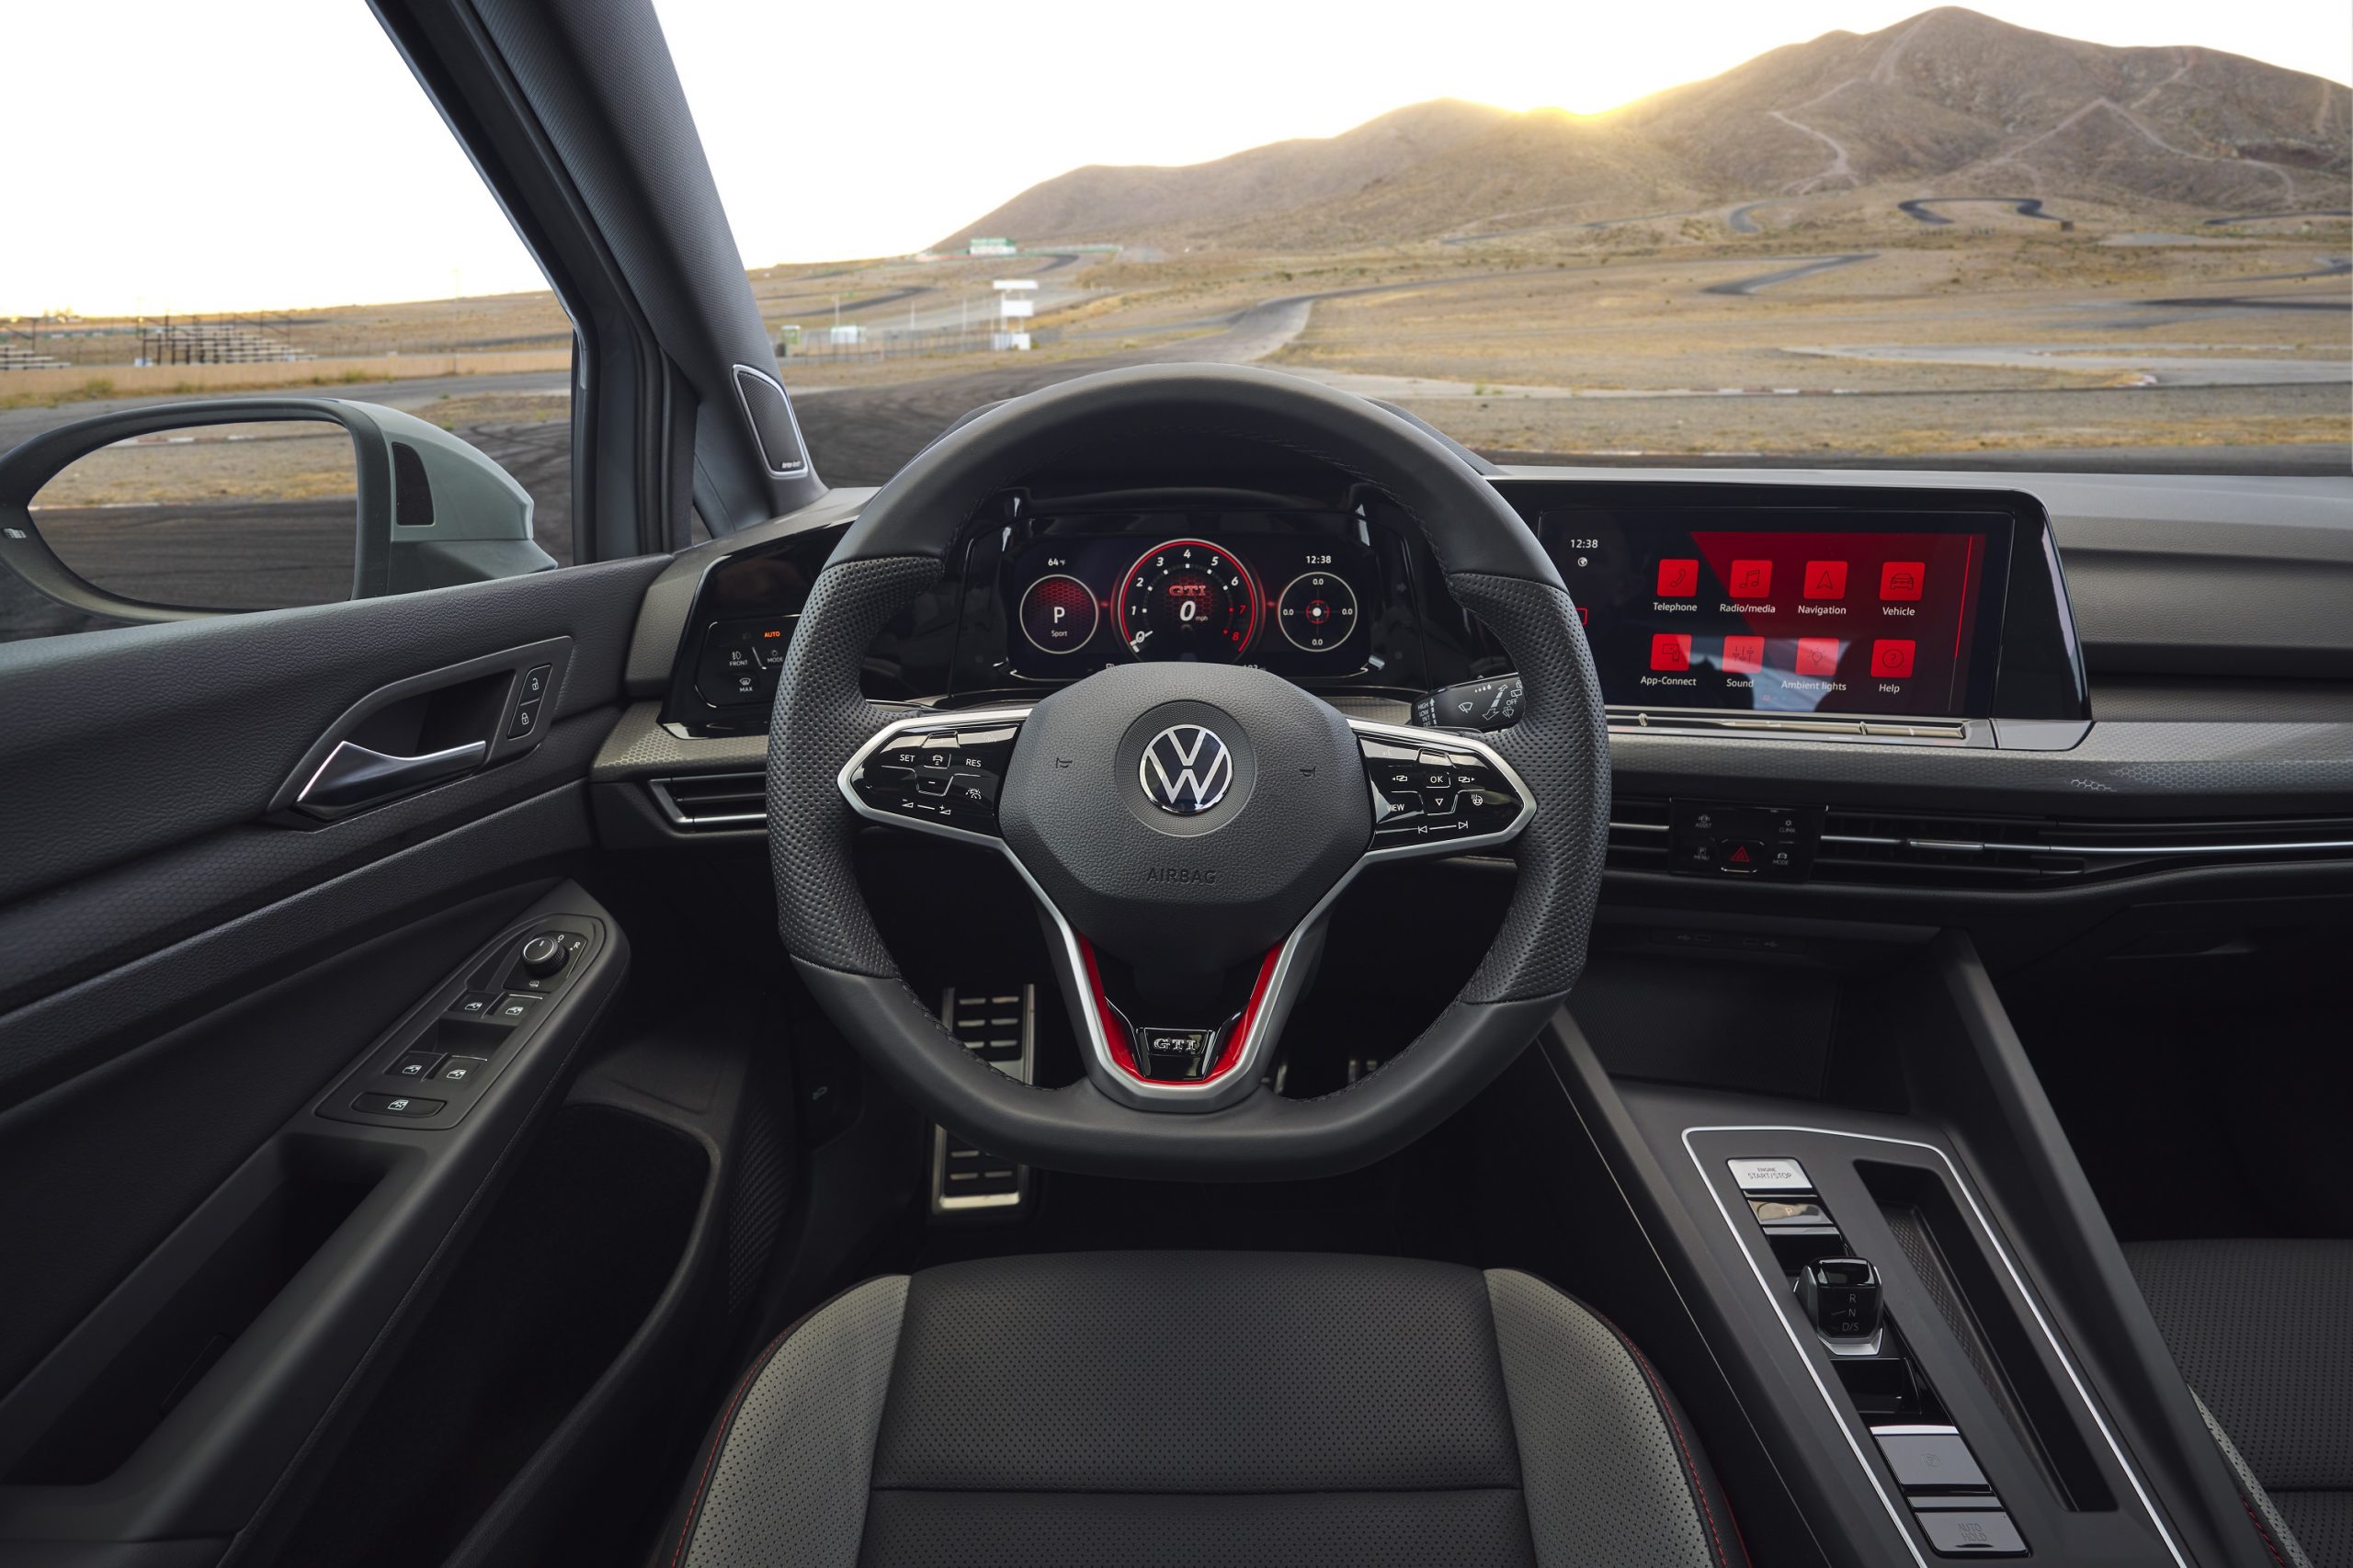 The interior of the new GTI with a new steering wheel and touch-sensitive buttons